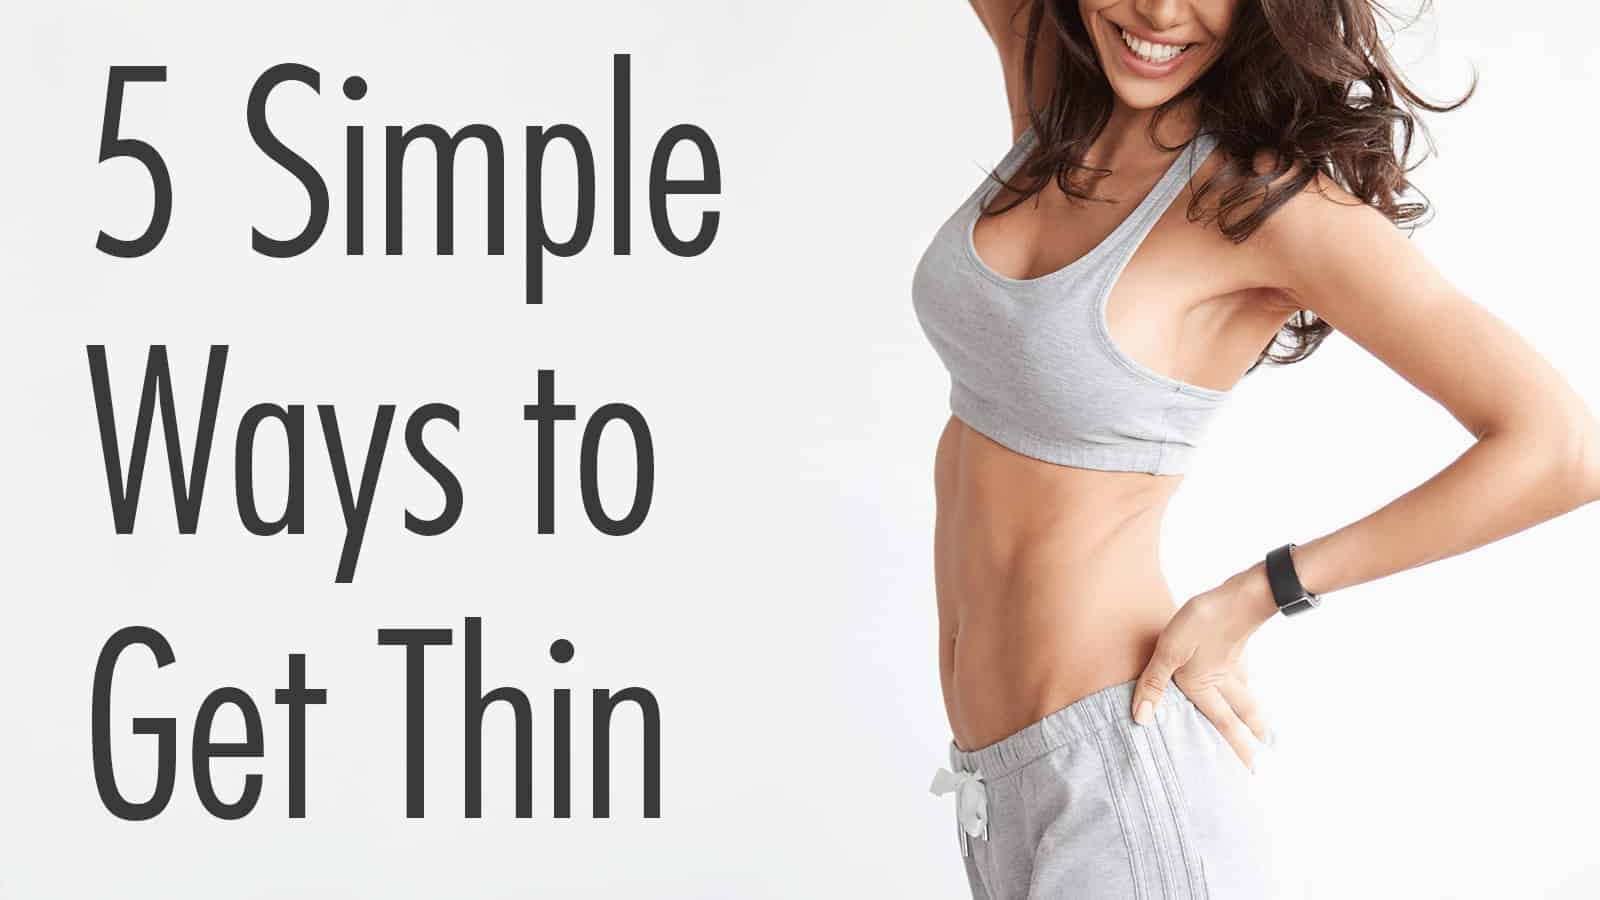 5 Simple Ways to Get Thin